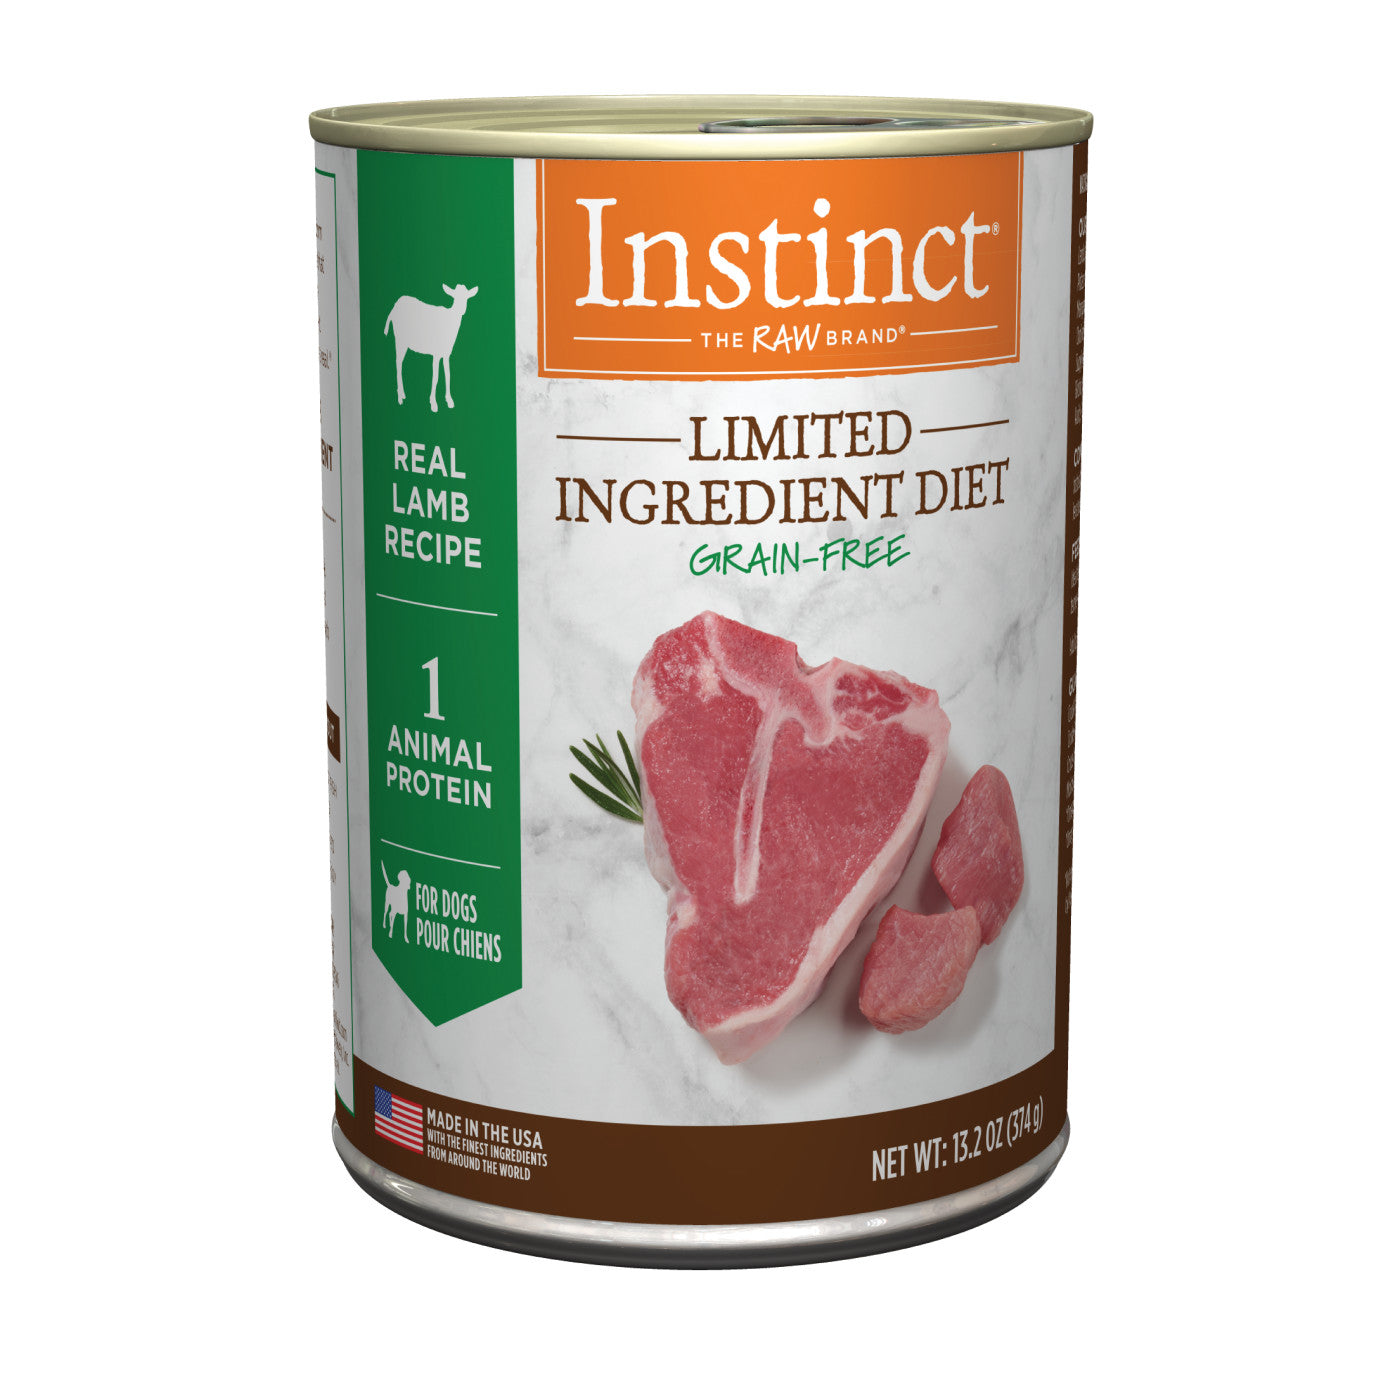 Instinct Limited Ingredient Diet Grain-Free Real Lamb Recipe Canned Dog Food  Canned Dog Food  | PetMax Canada